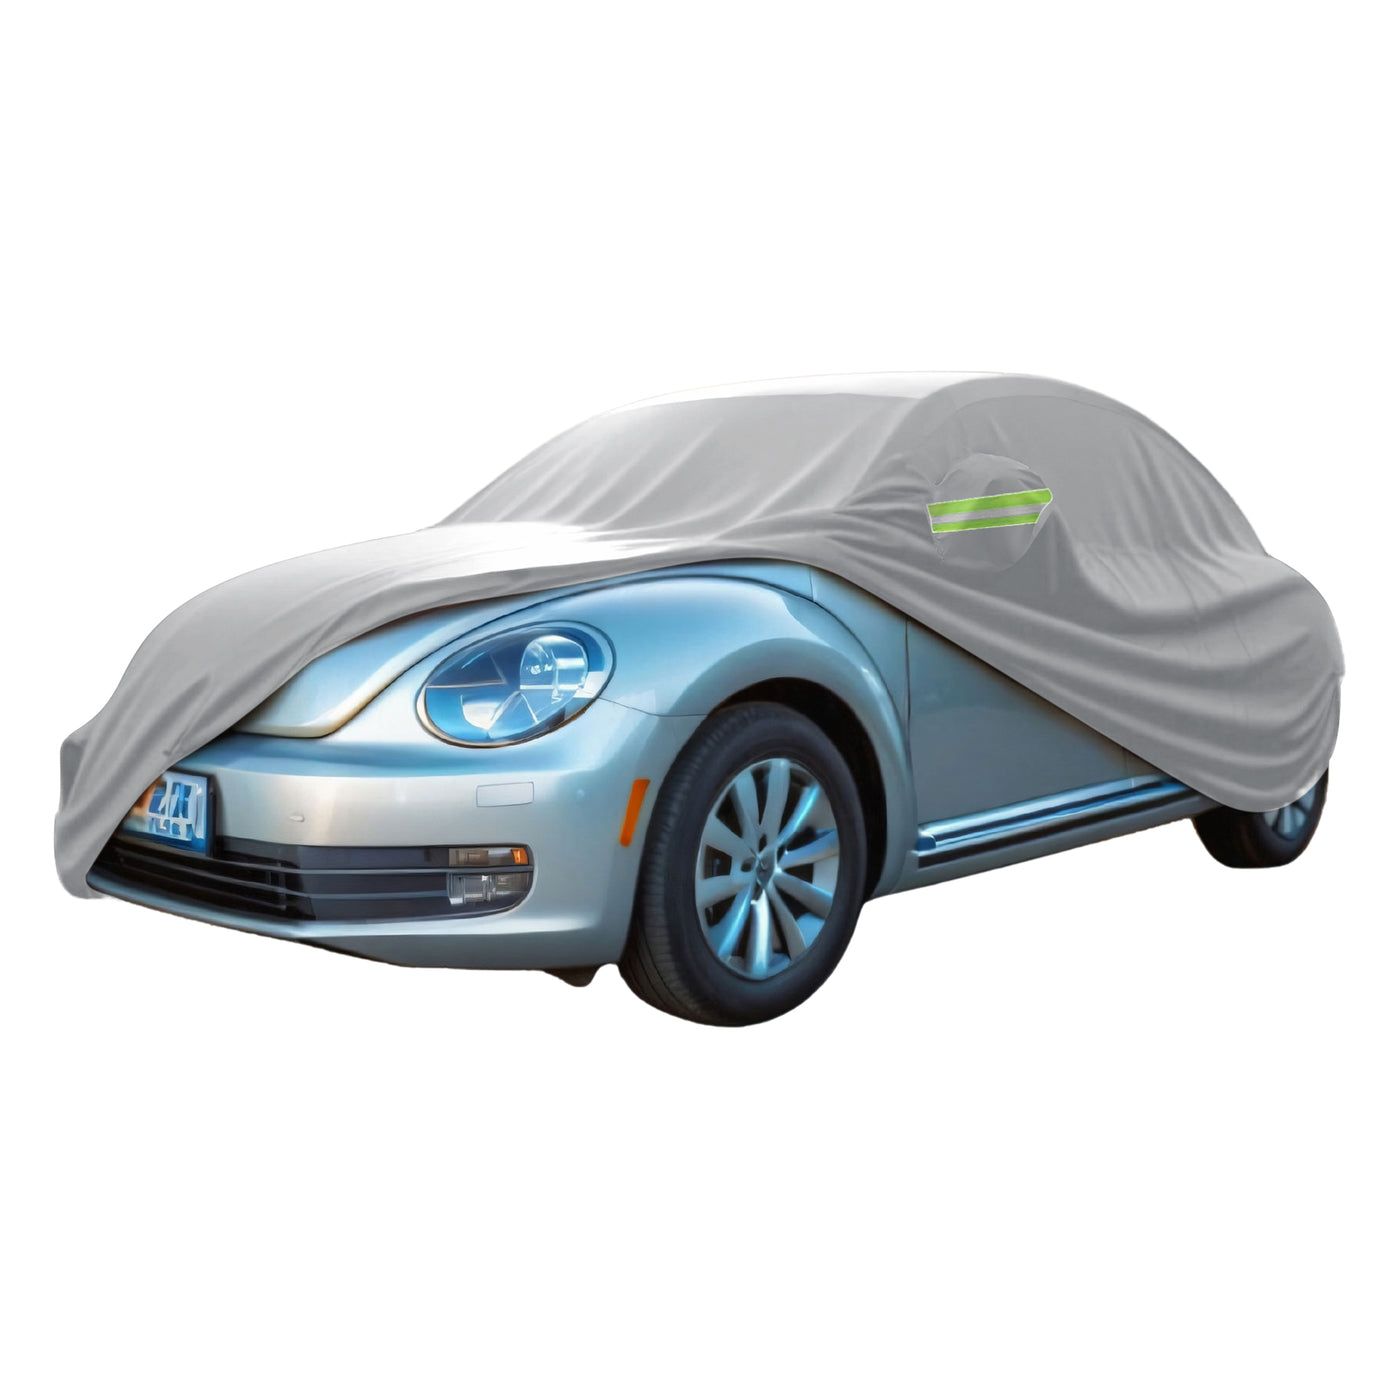 X AUTOHAUX for Volkswagen New Beetle Cover Car Cover for Volkswagen New Beetle 1998-2019 Outdoor Full Car Cover All Weather Protection with Zipper Silver Tone